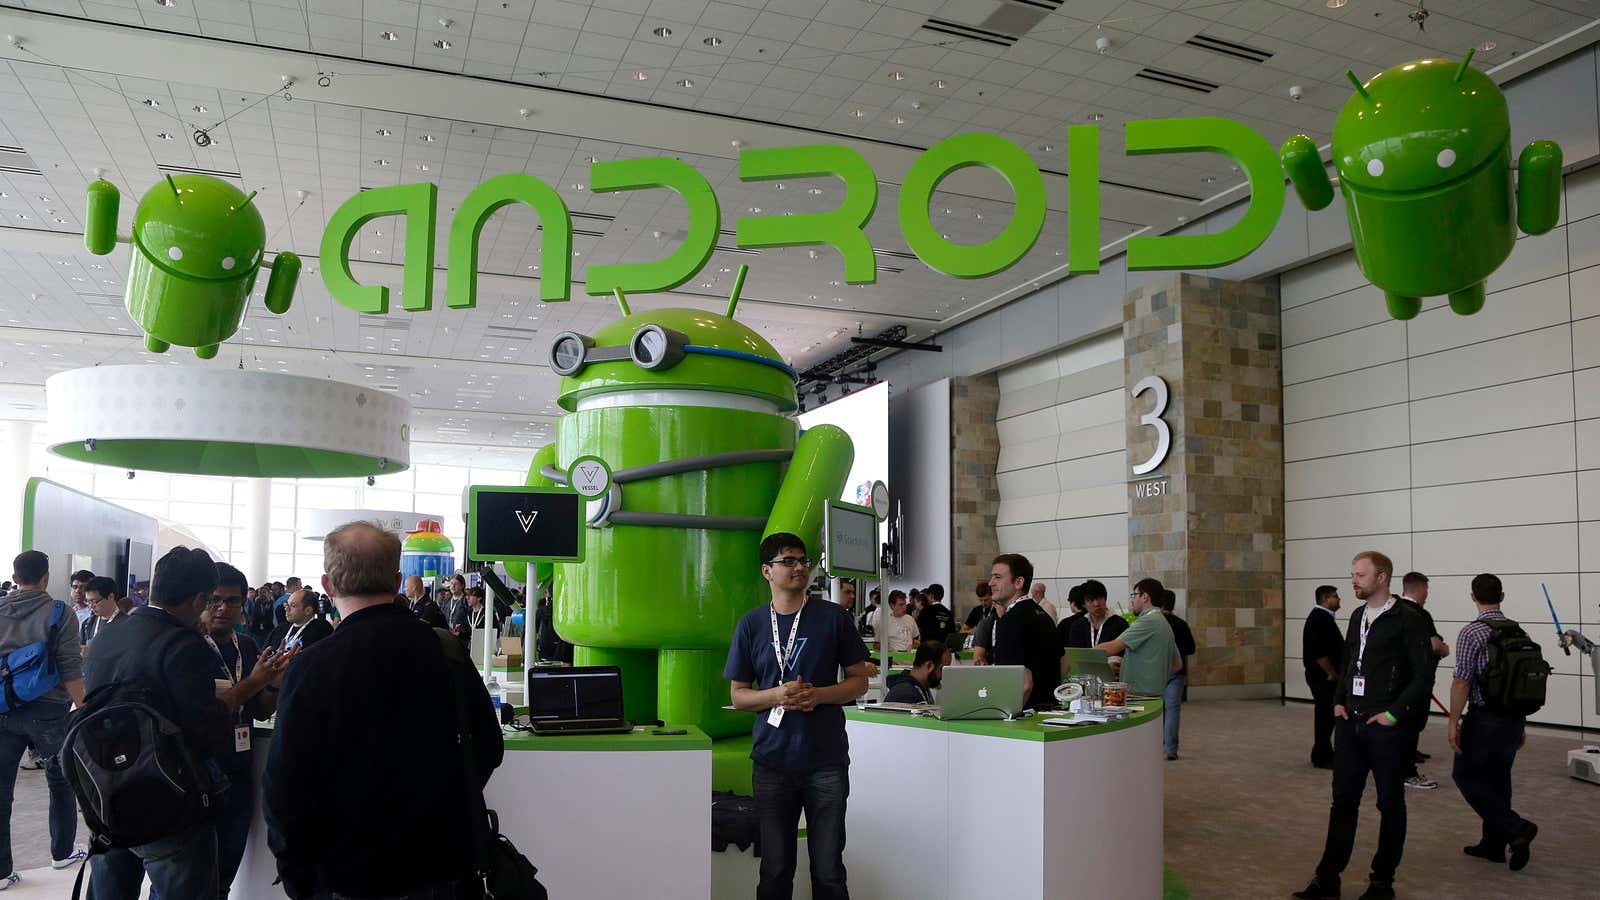 Android isn’t web-based, but maybe it doesn’t need to be